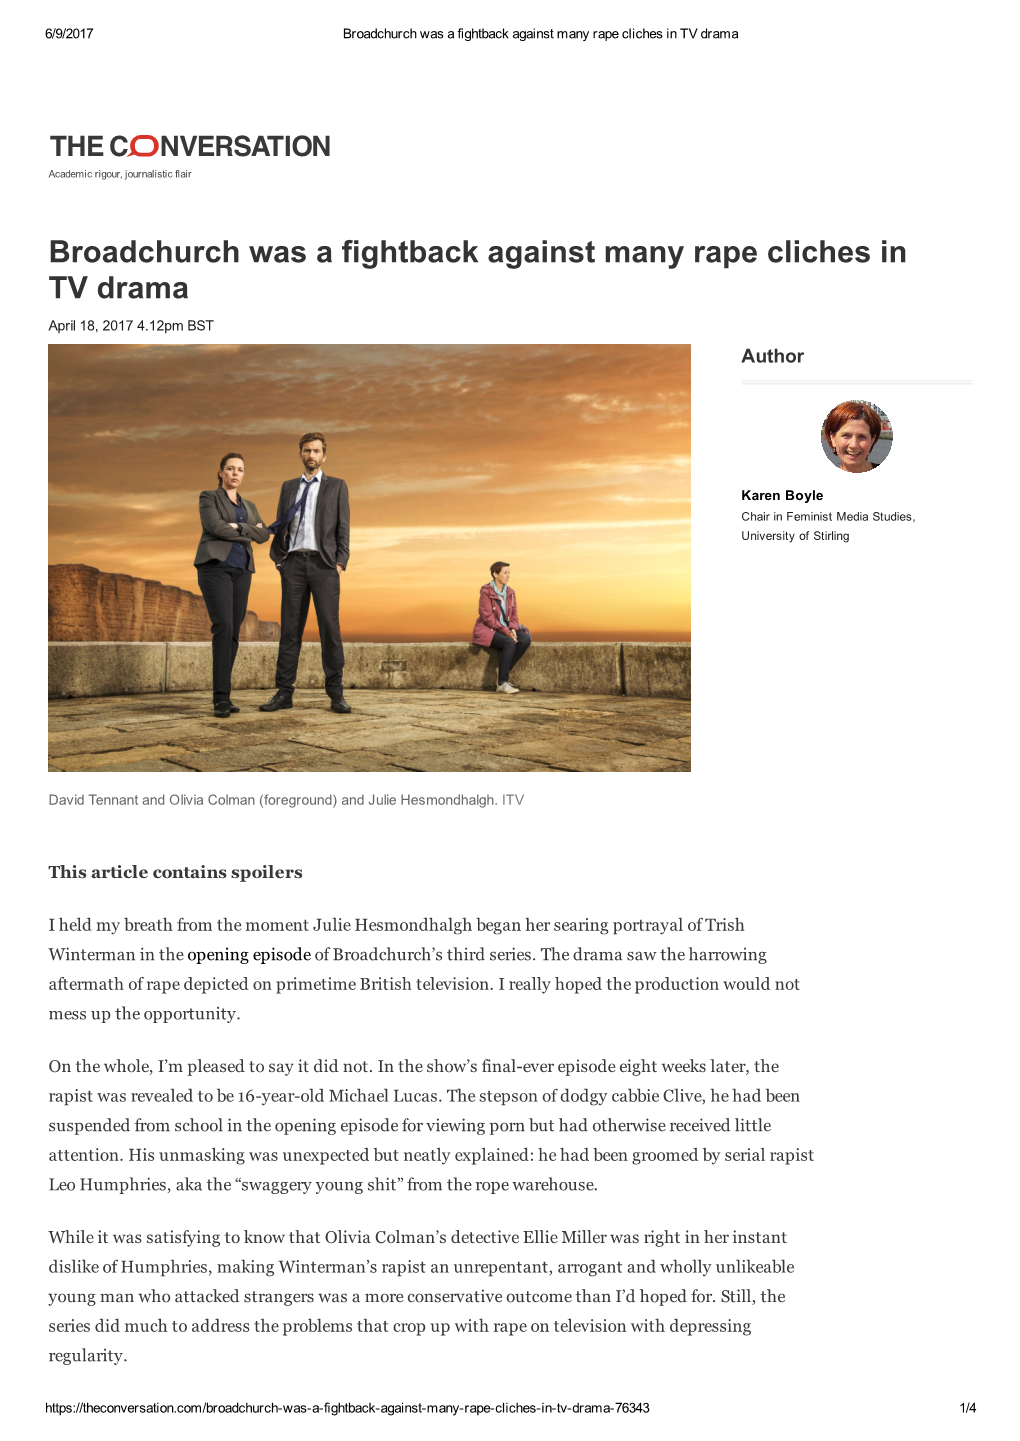 Broadchurch Was a Fightback Against Many Rape Cliches in TV Drama